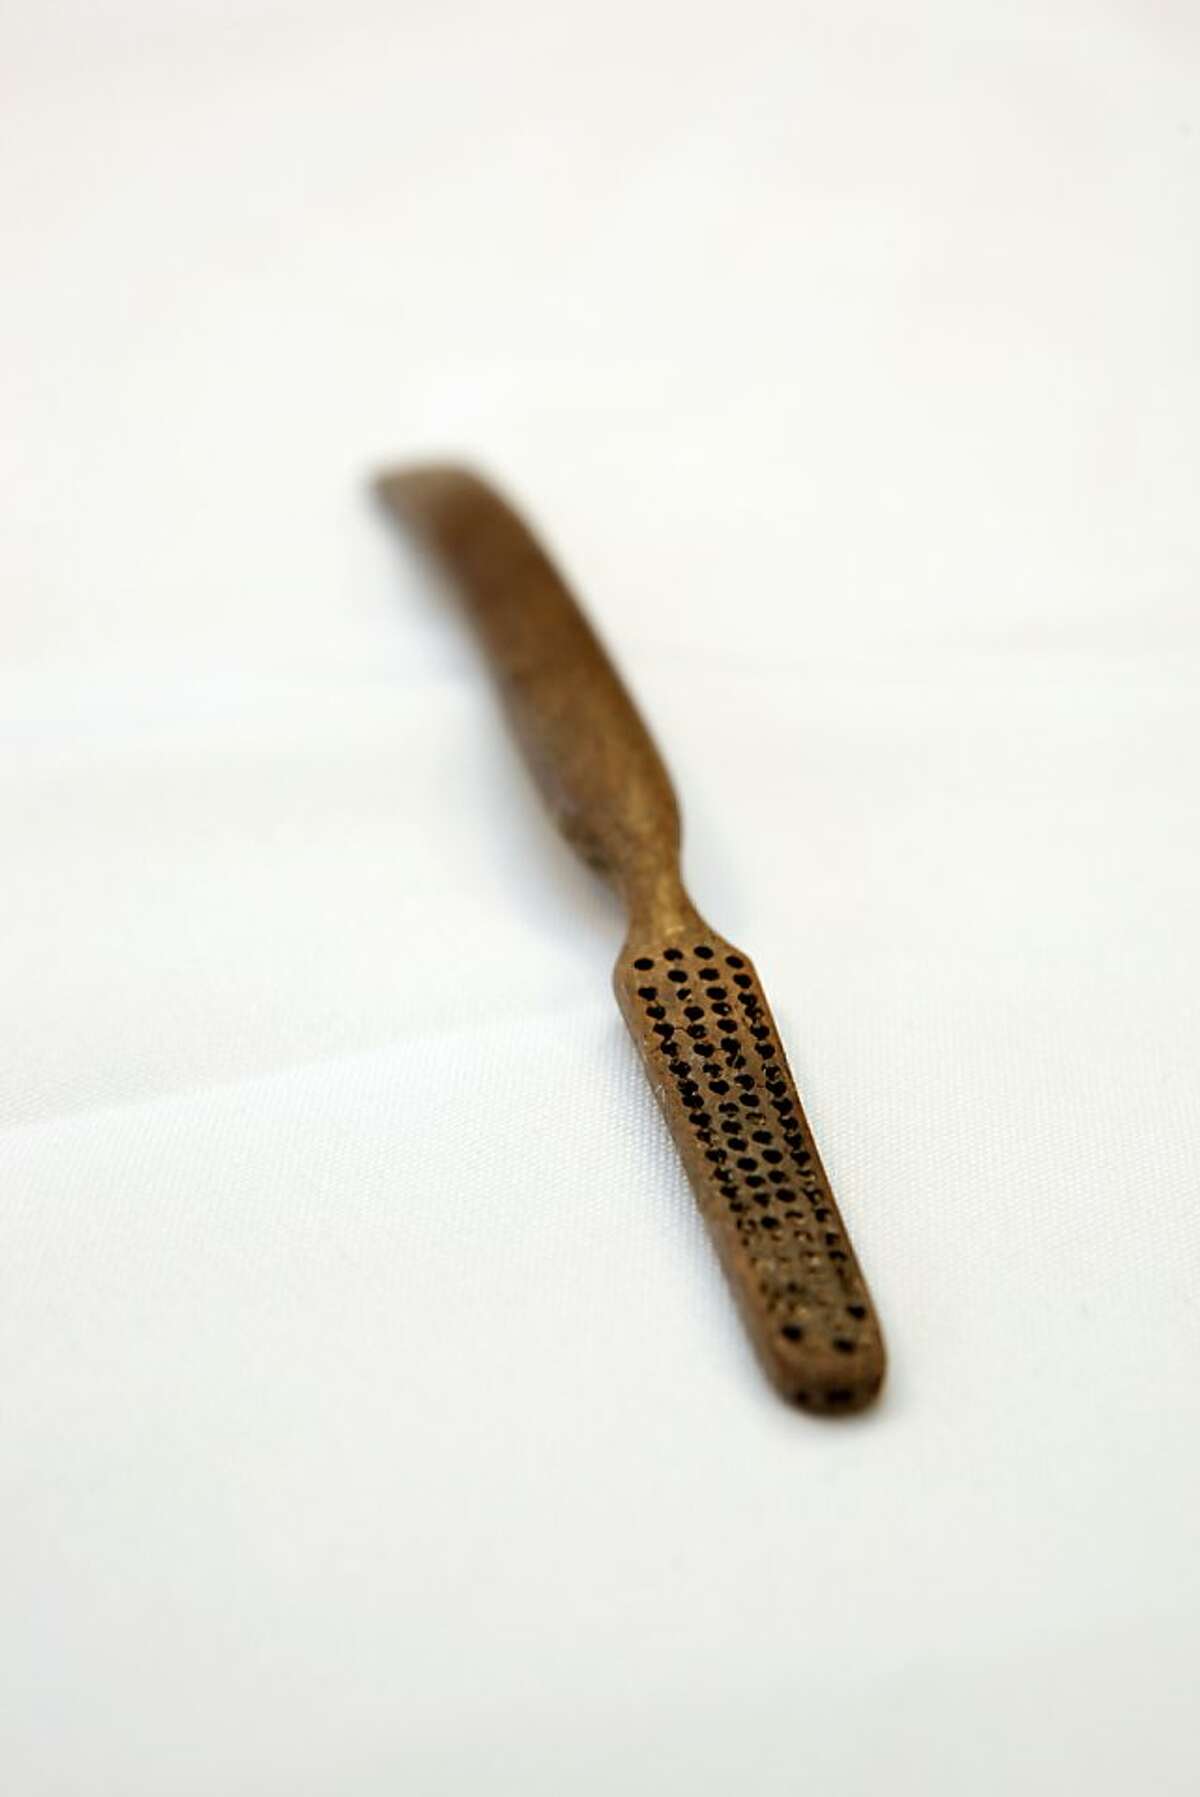 A bone toothbrush from the second half of the 19th century, found at 45 Minna Street, and was shown to the Chronicle on Wednesday, November 30, 2011 in San Francisco, Calif.